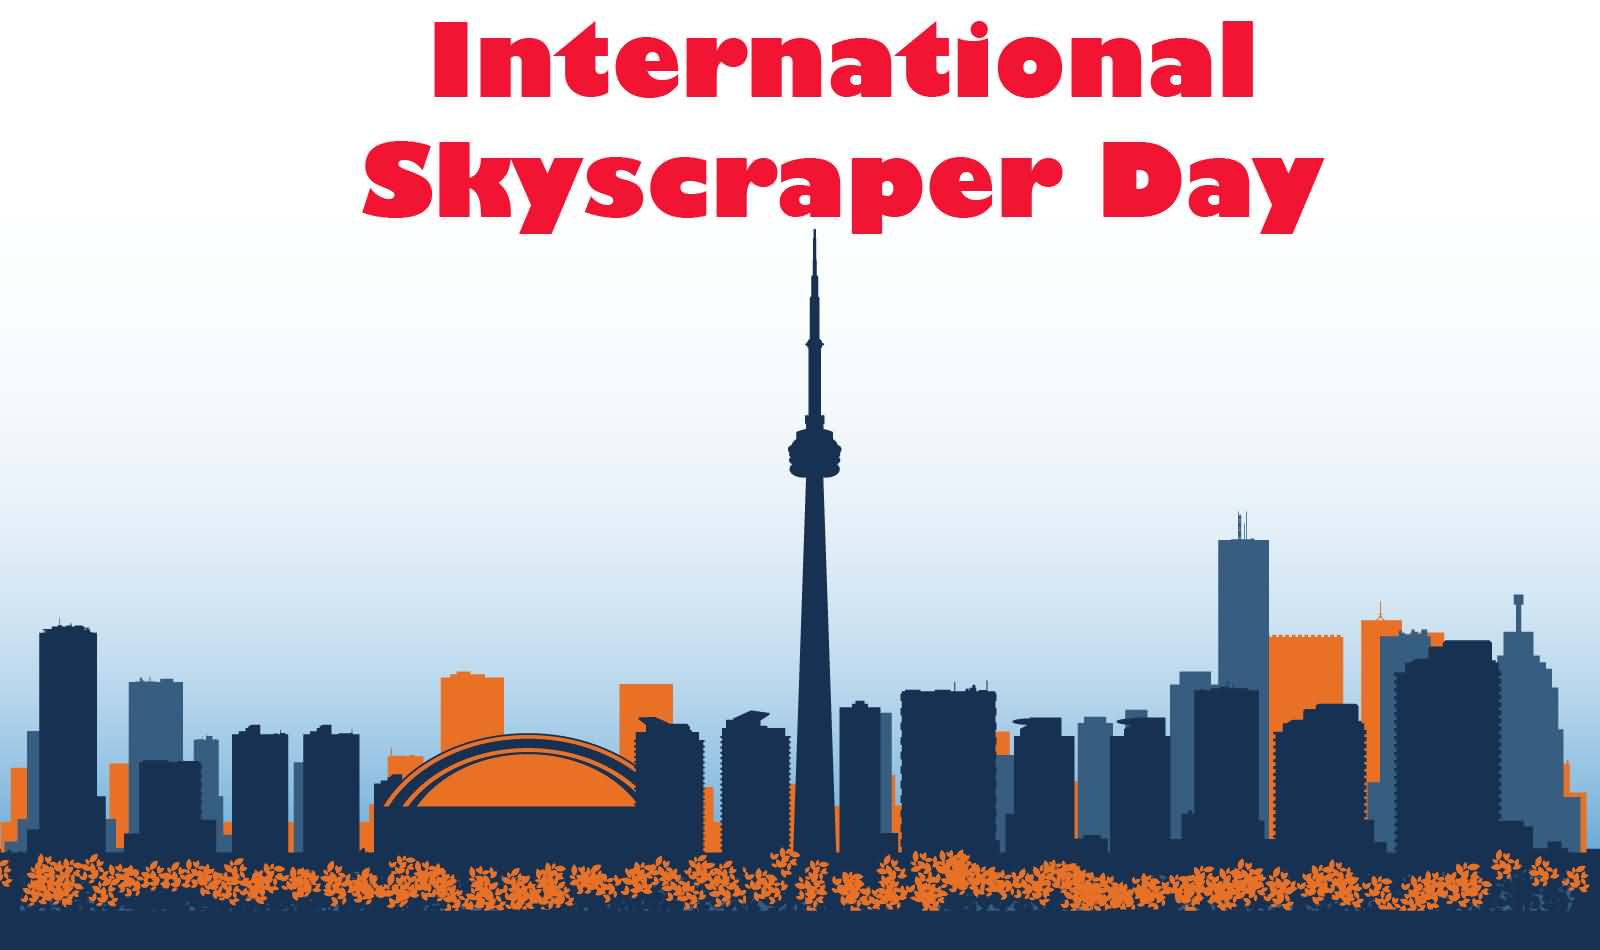 National Skyscraper Day 2017 Wishes